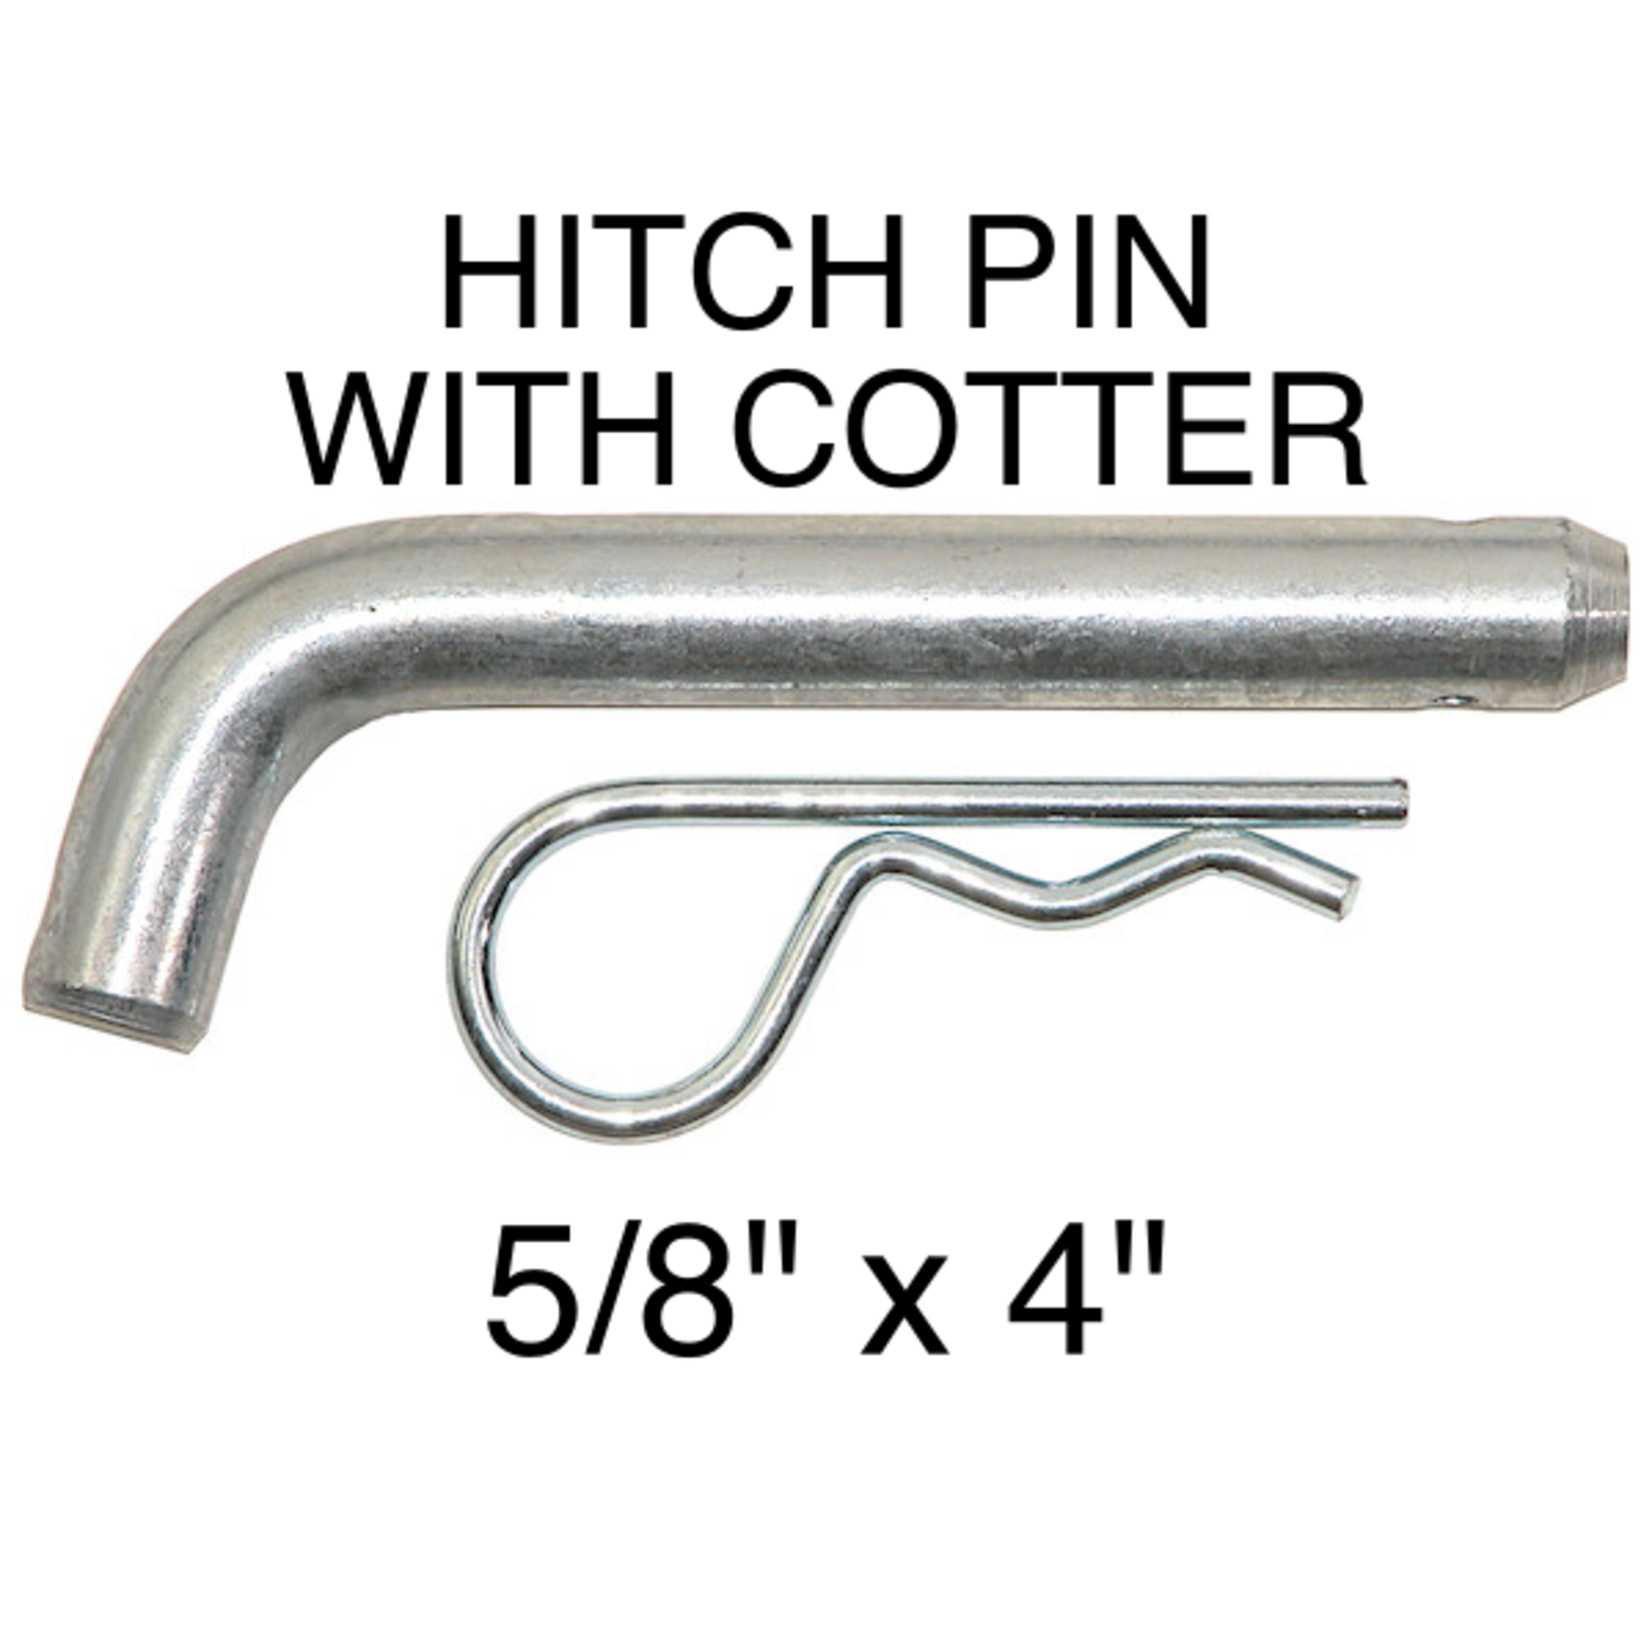 Buyers Hitch Pin, 5/8" with Cotter Pin, Zinc Plated, 724920086332